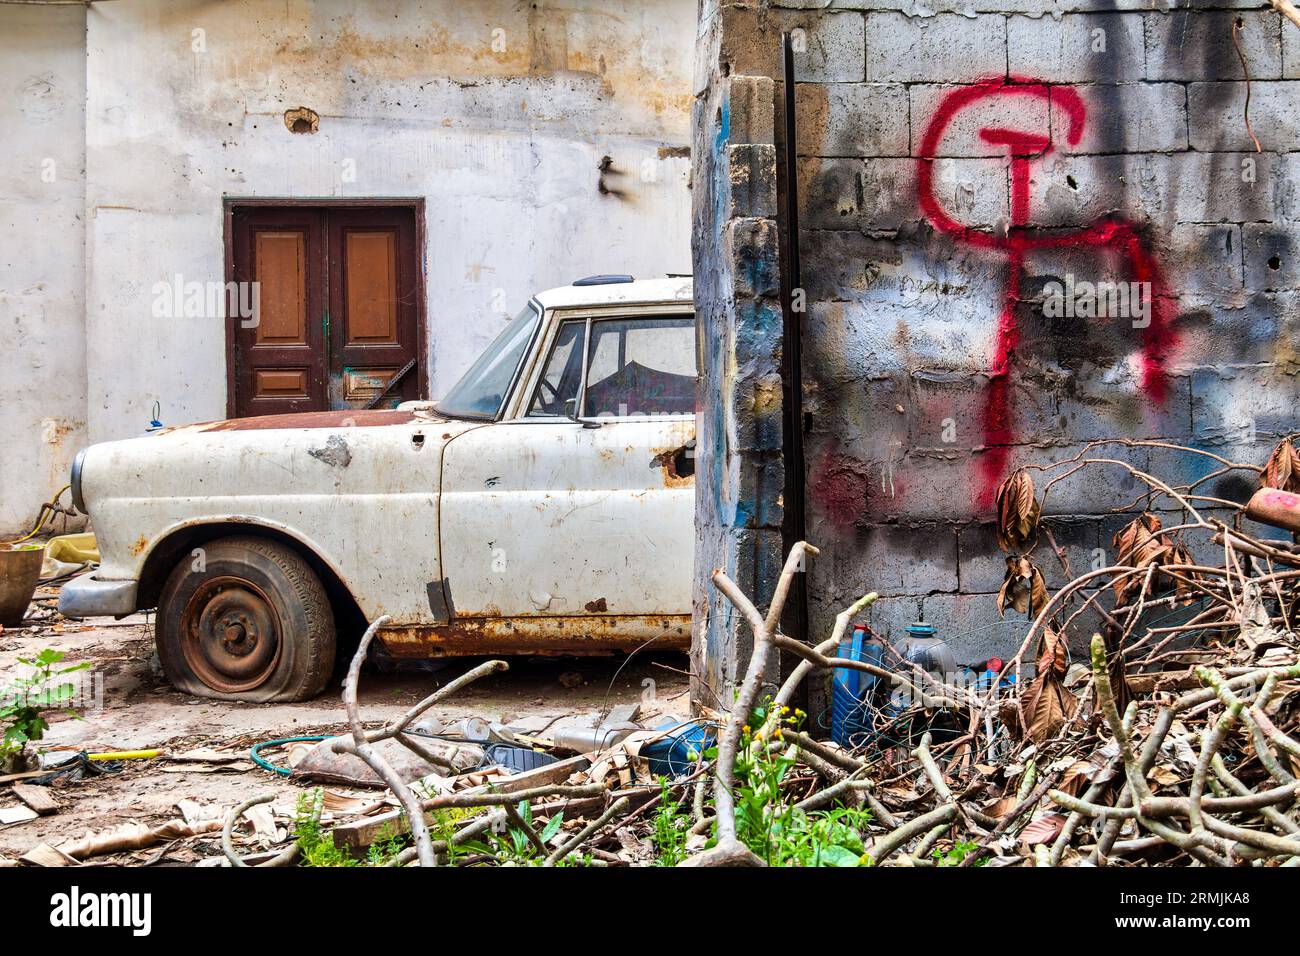 Rusty old car parked next to a brick wall with communism sign (hammer and sickle) on it. The car is a Mercedes-Benz W110, and it is in a state of disr Stock Photo